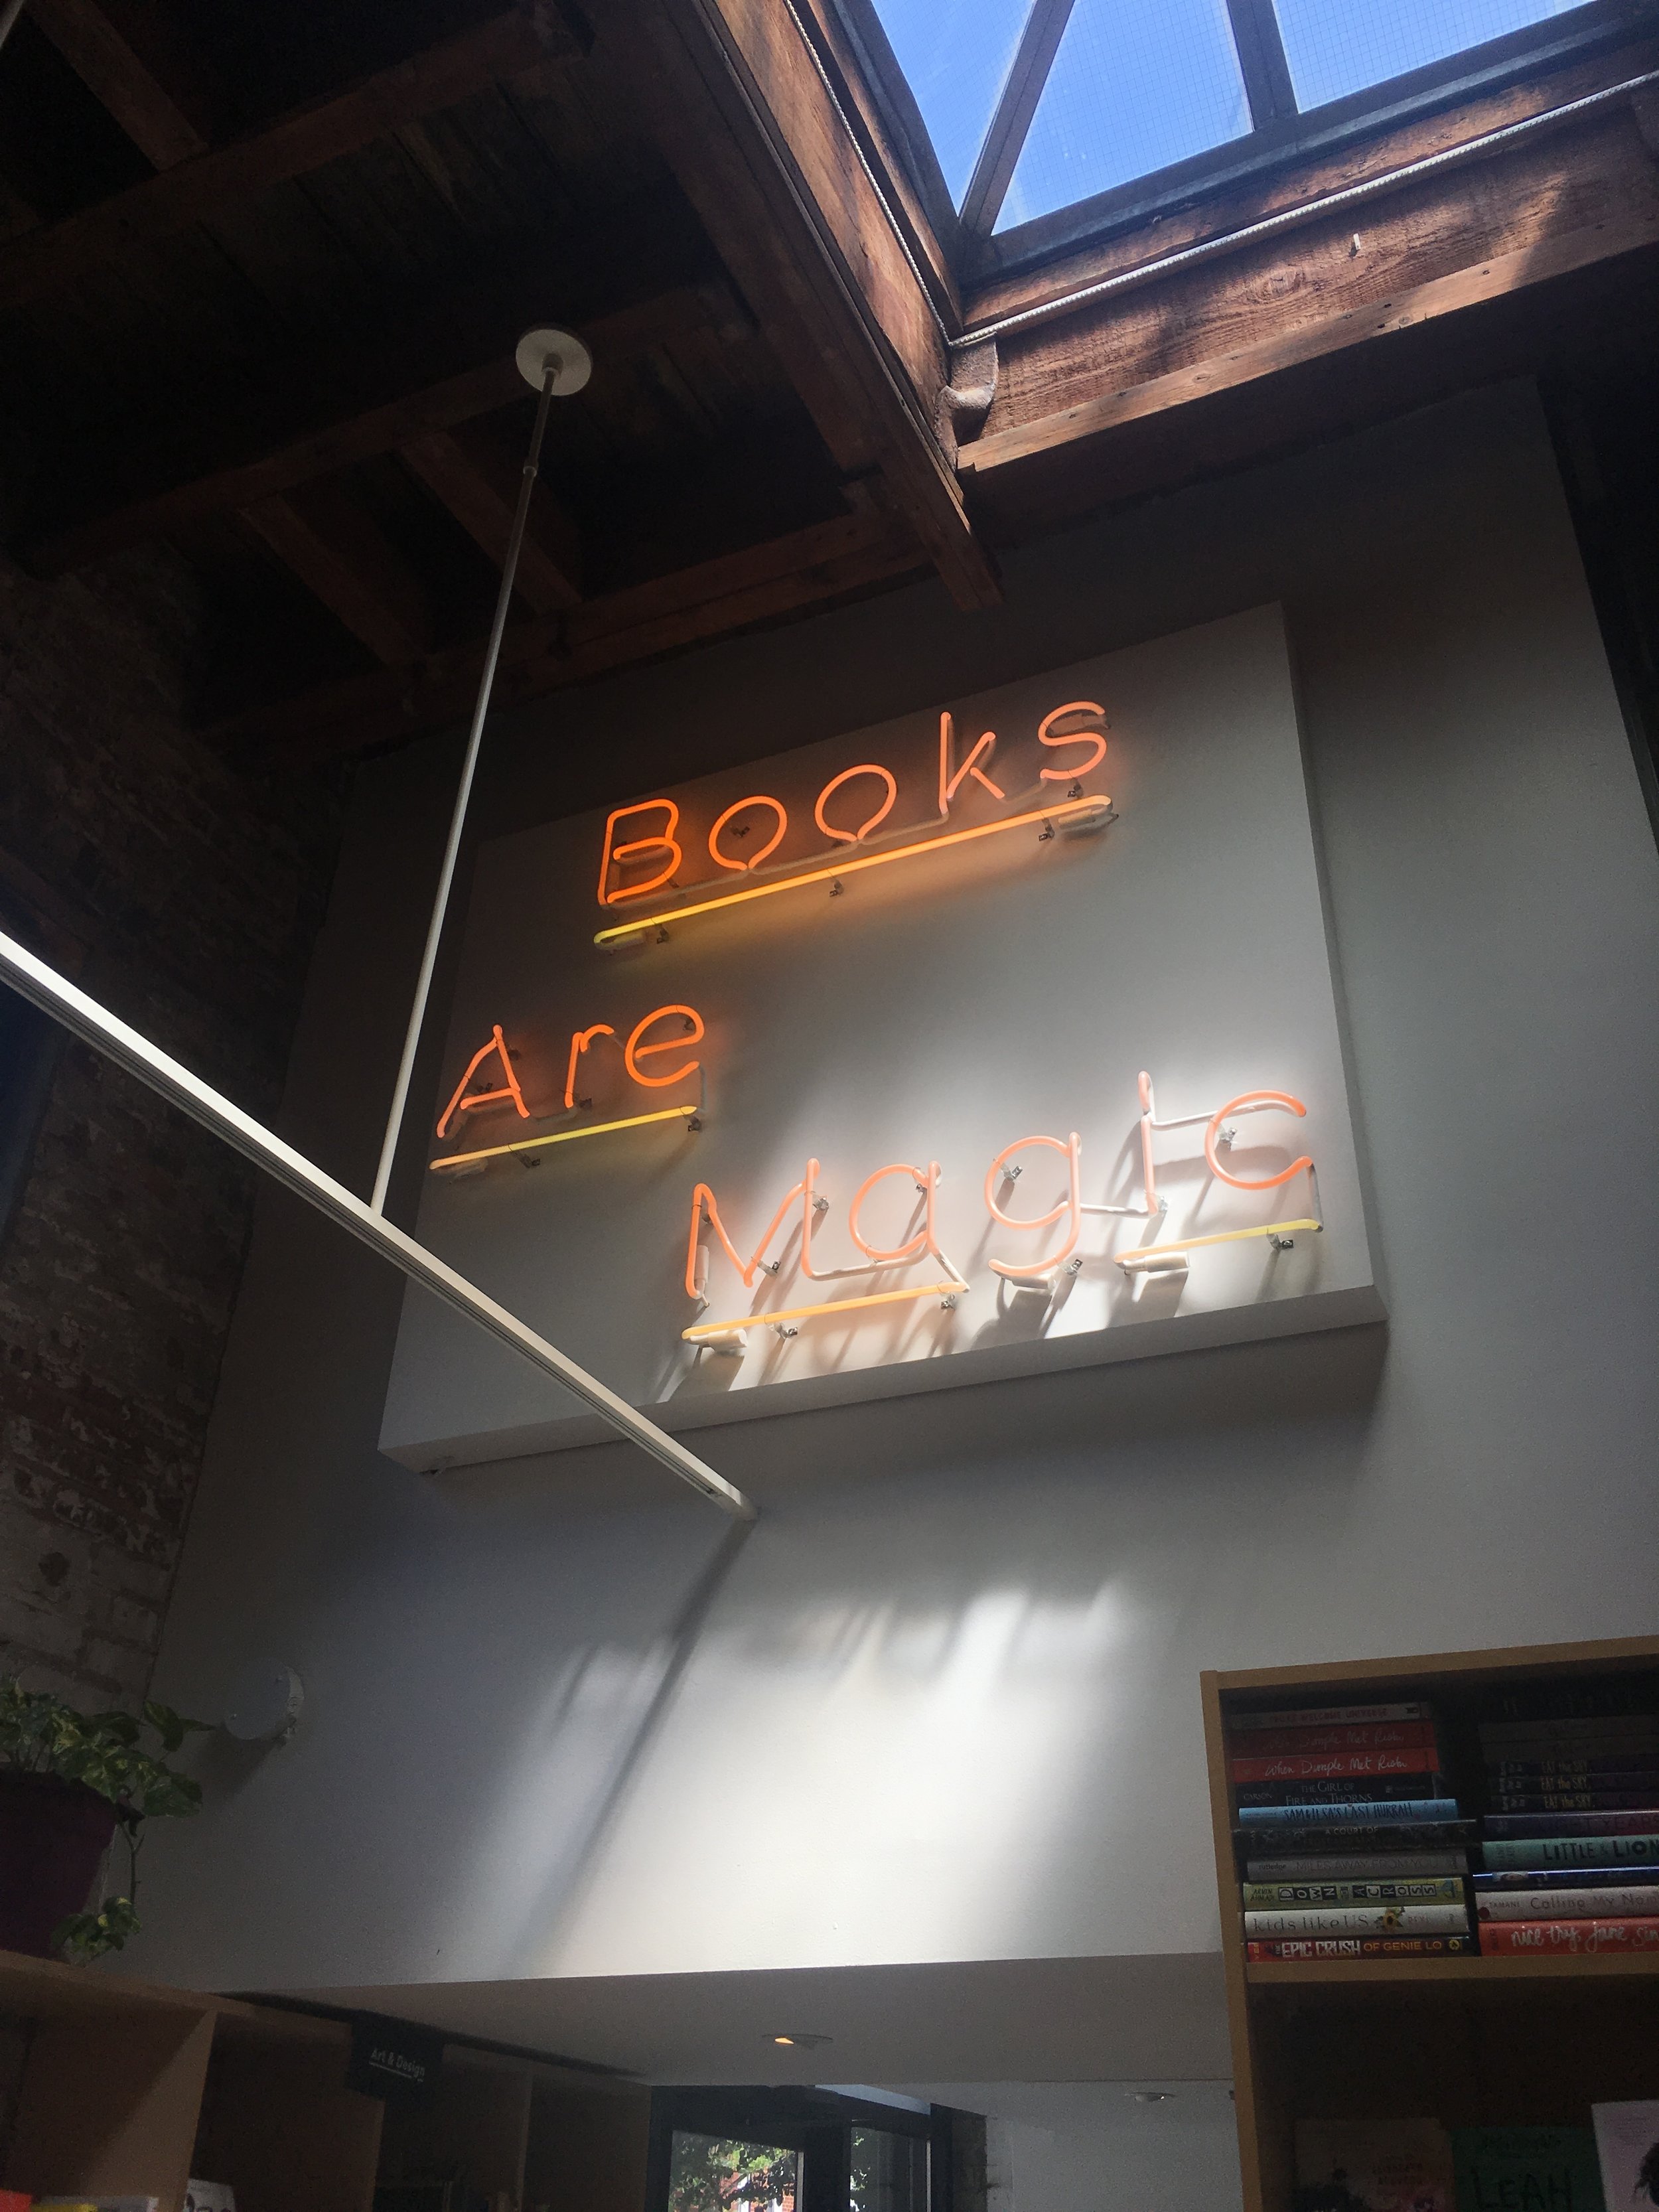 Books are Magic is adding a second location in Brooklyn Heights